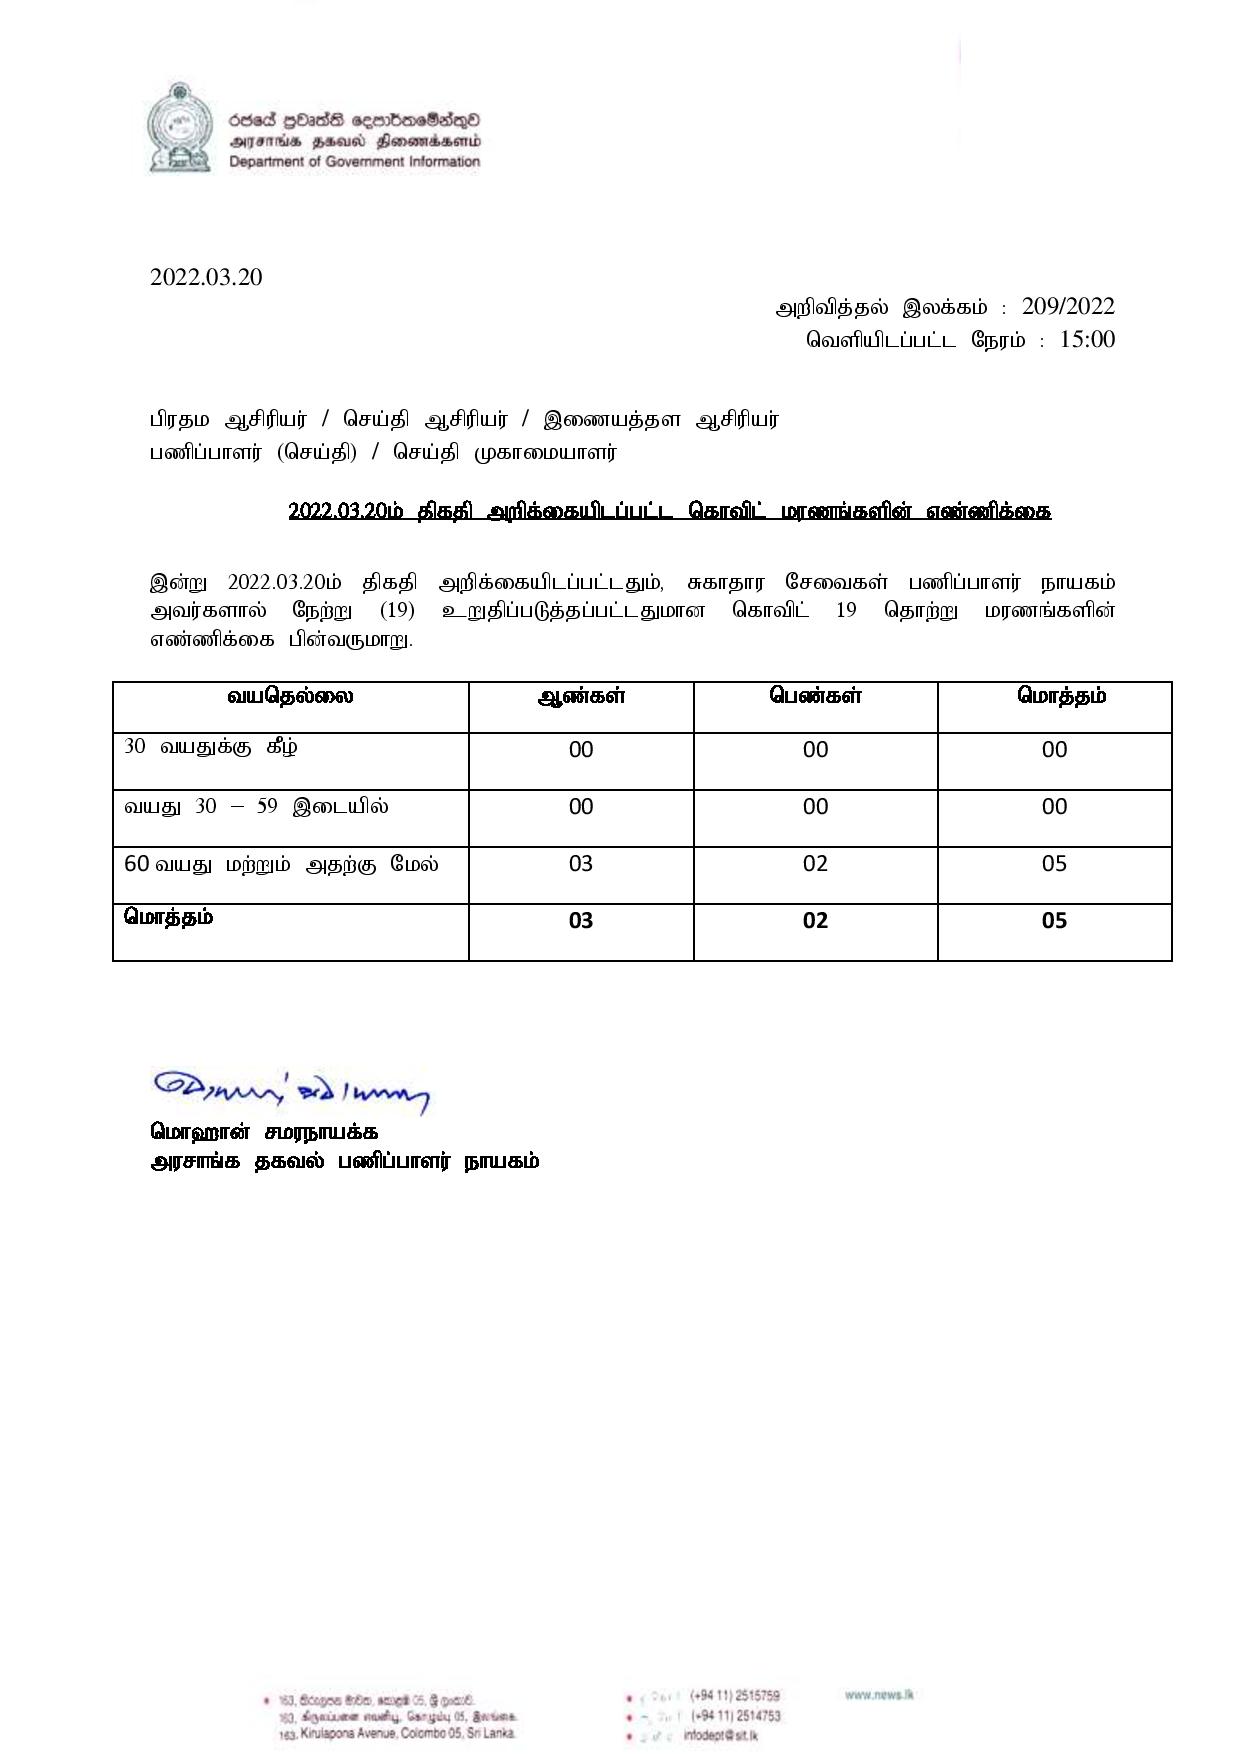 Press Release 209 Tamil page 001